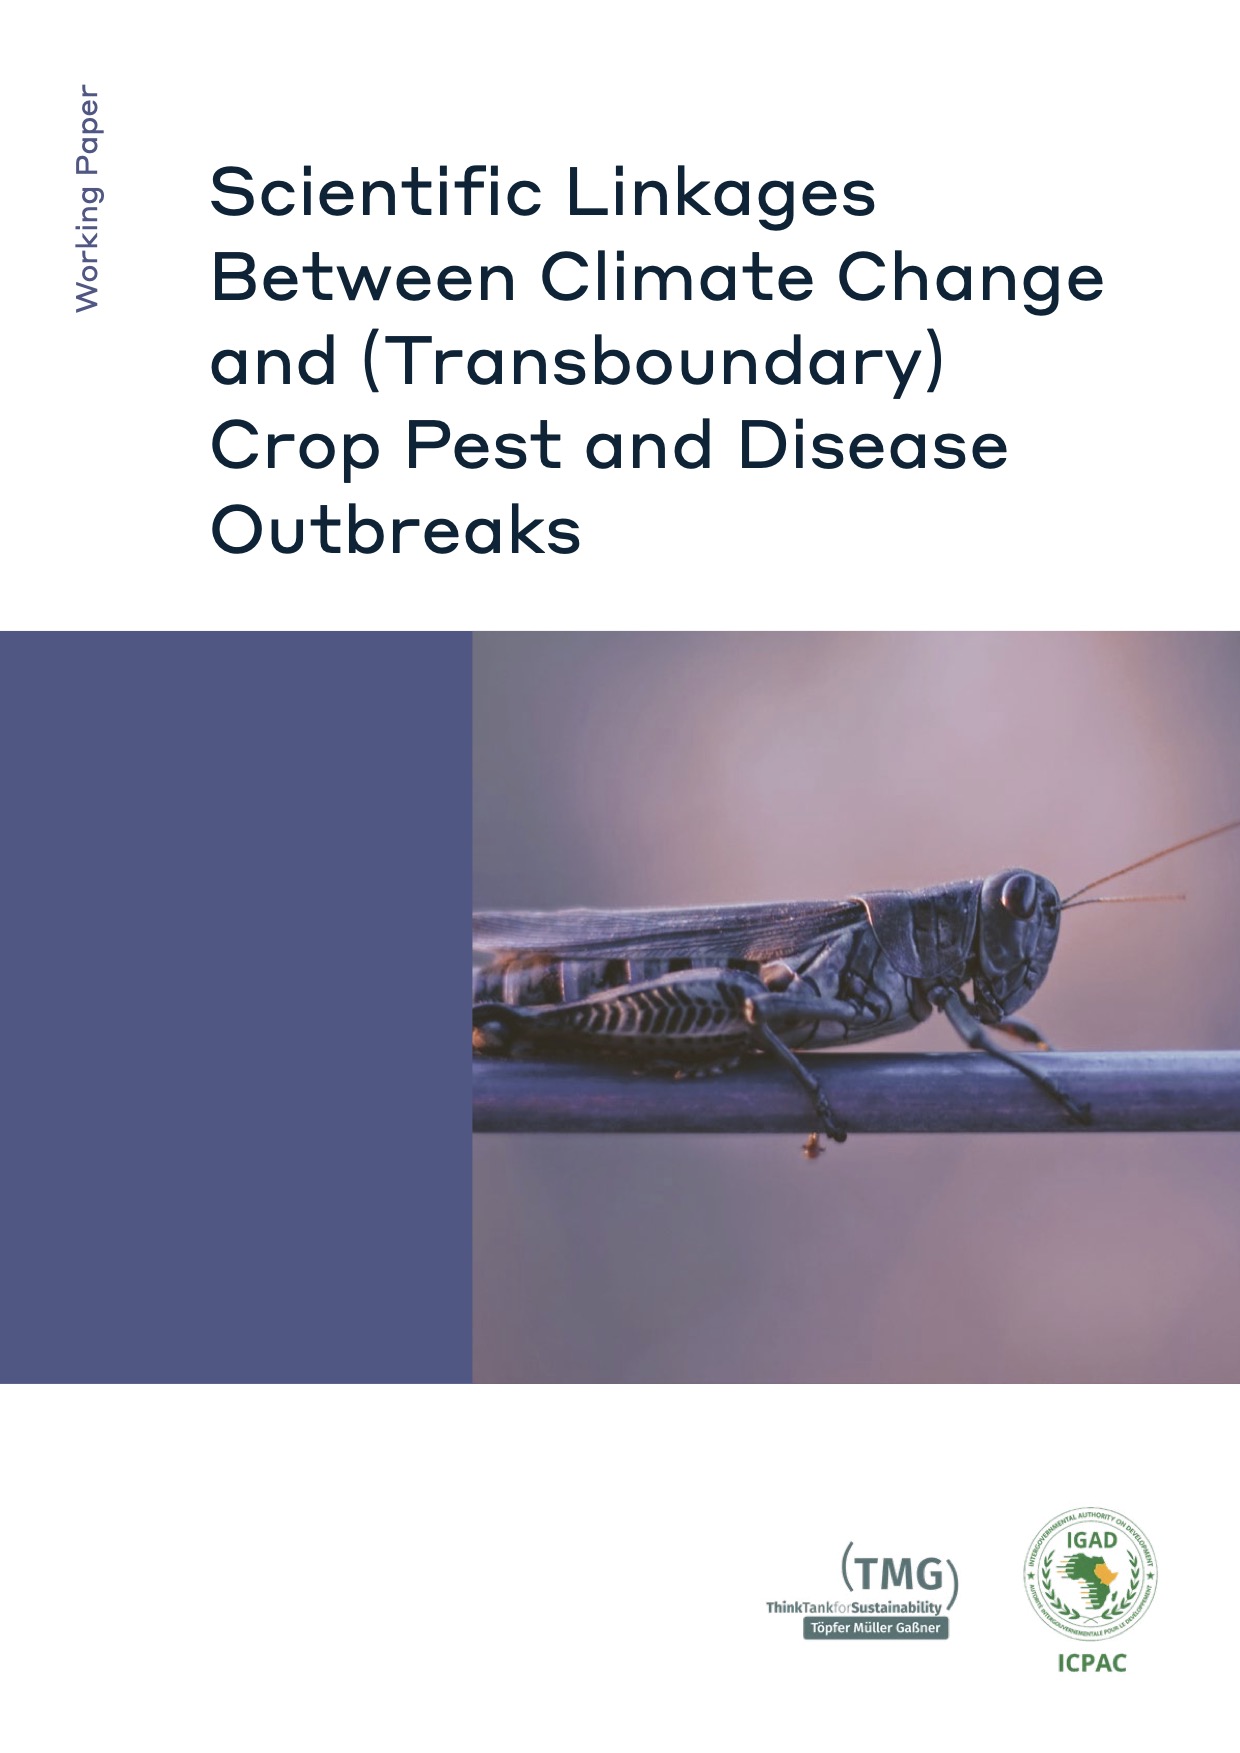 Scientific Linkages Between Climate Change and (Transboundary) Crop Pest and Disease Outbreaks